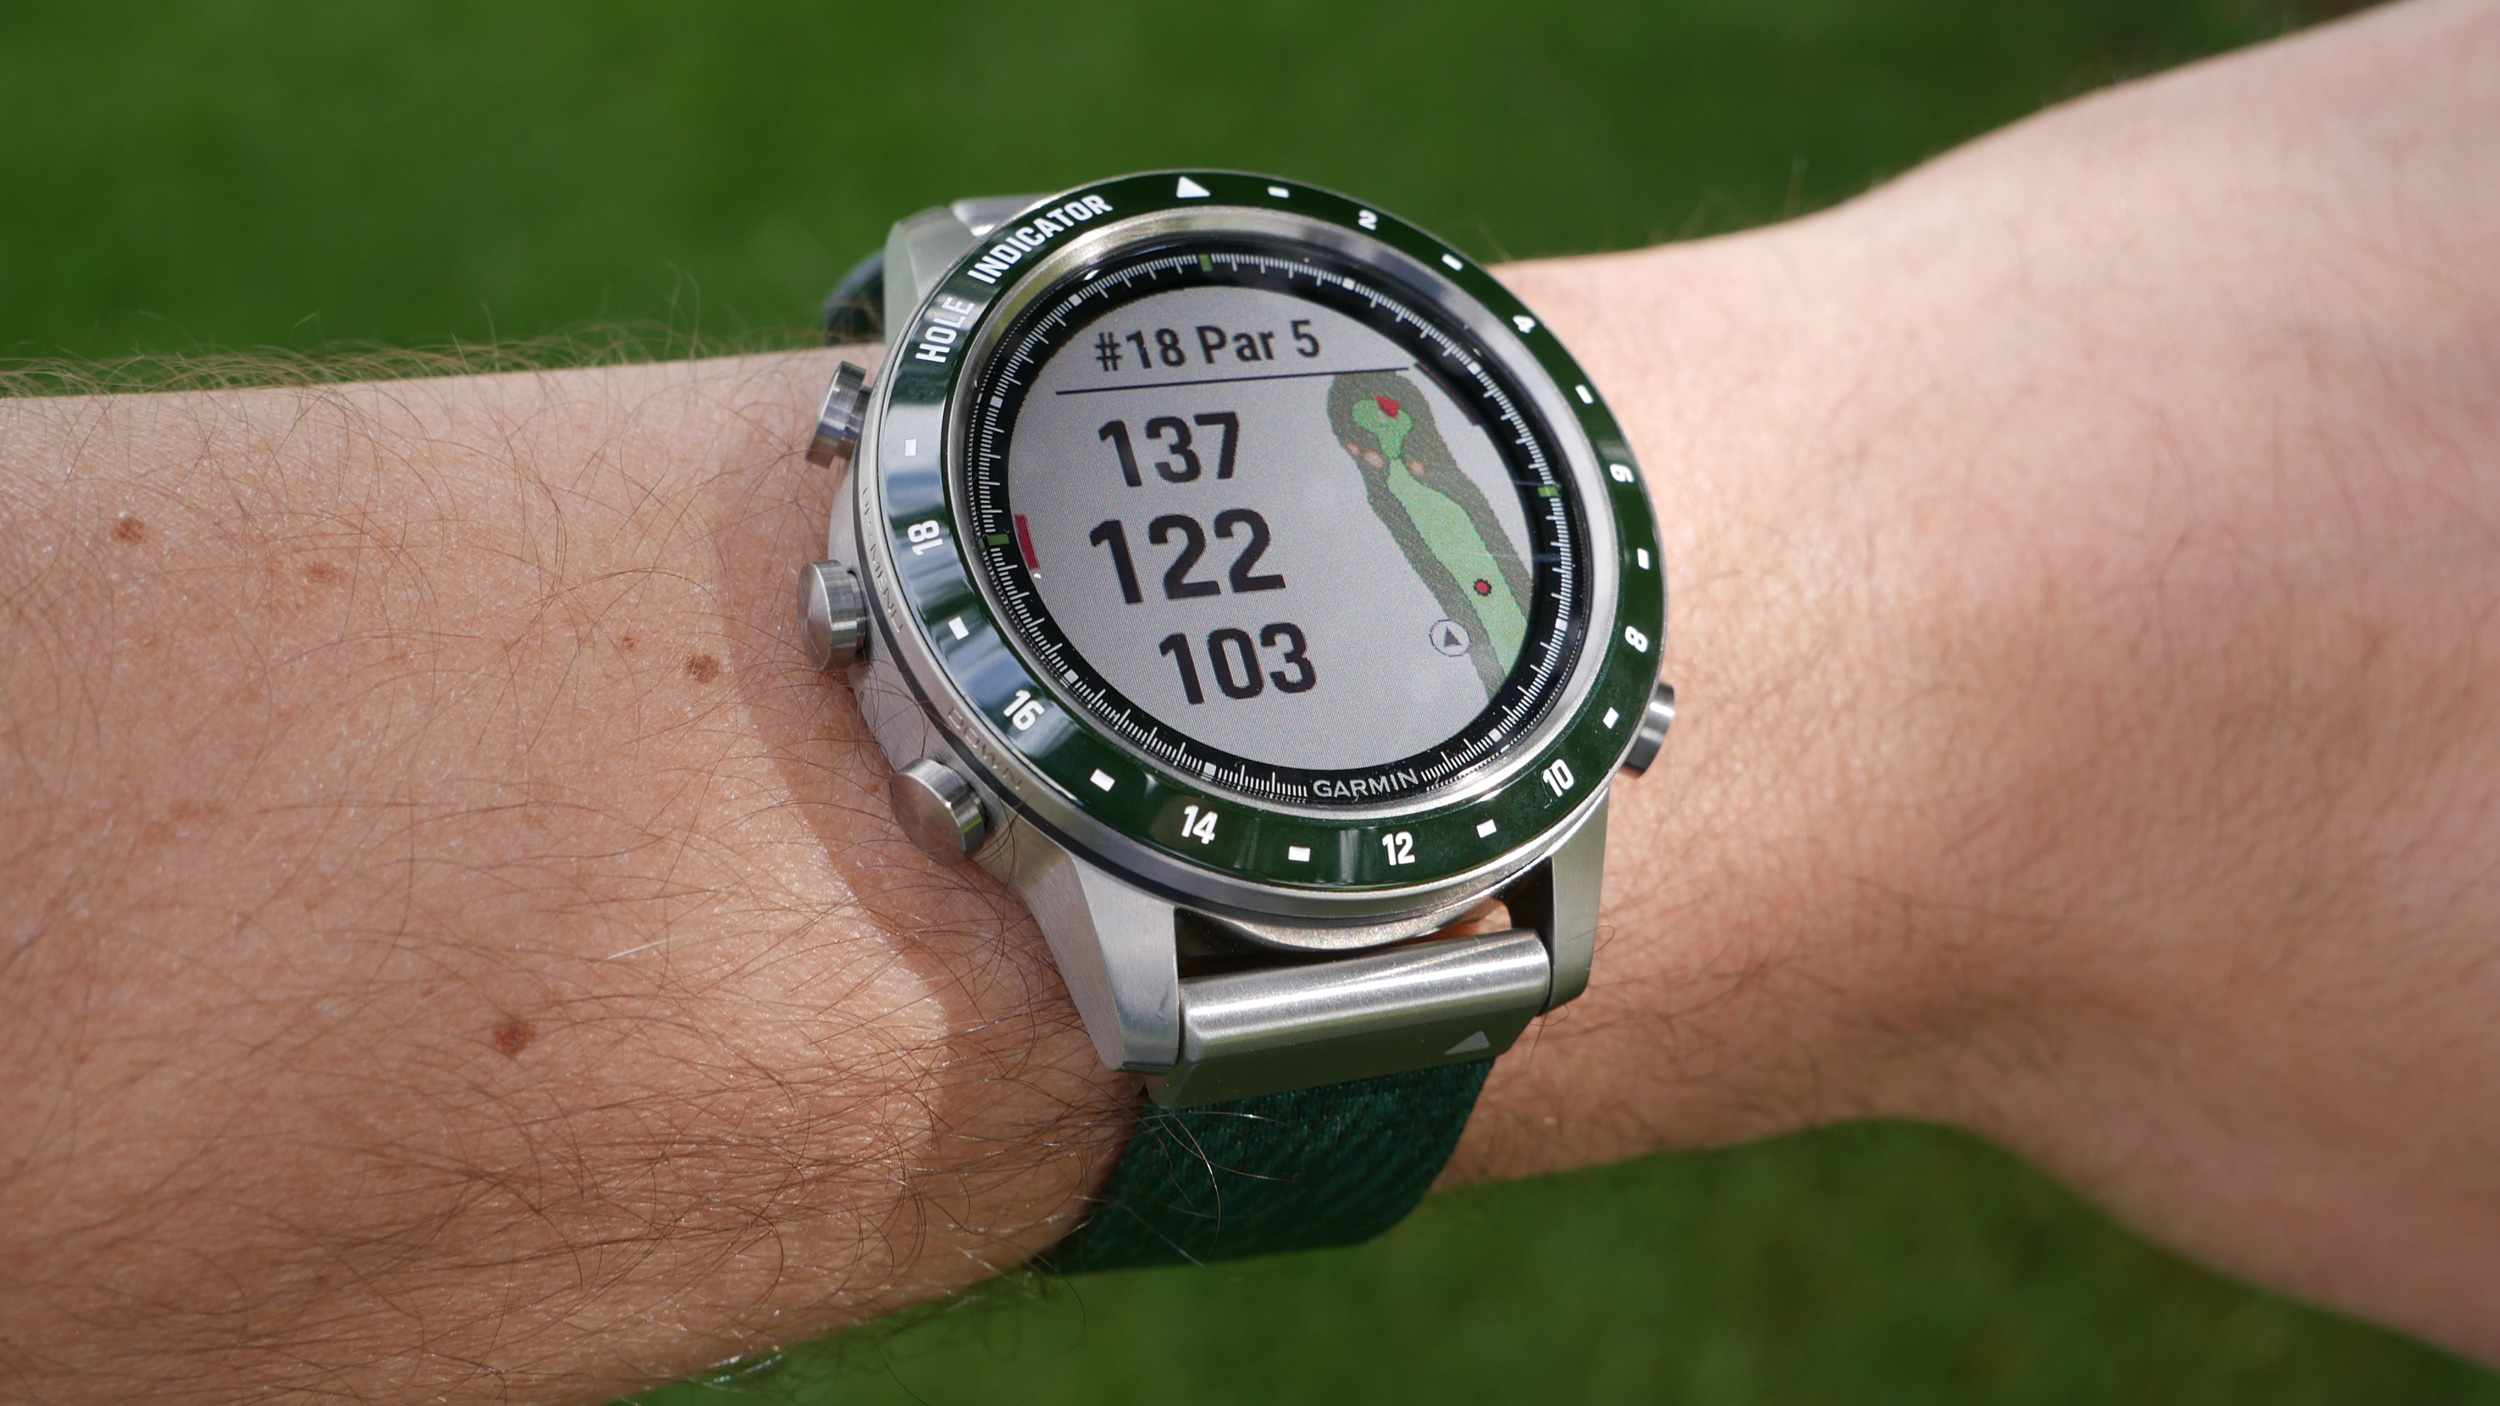 Garmin Approach S12 Watch Review - Plugged In Golf